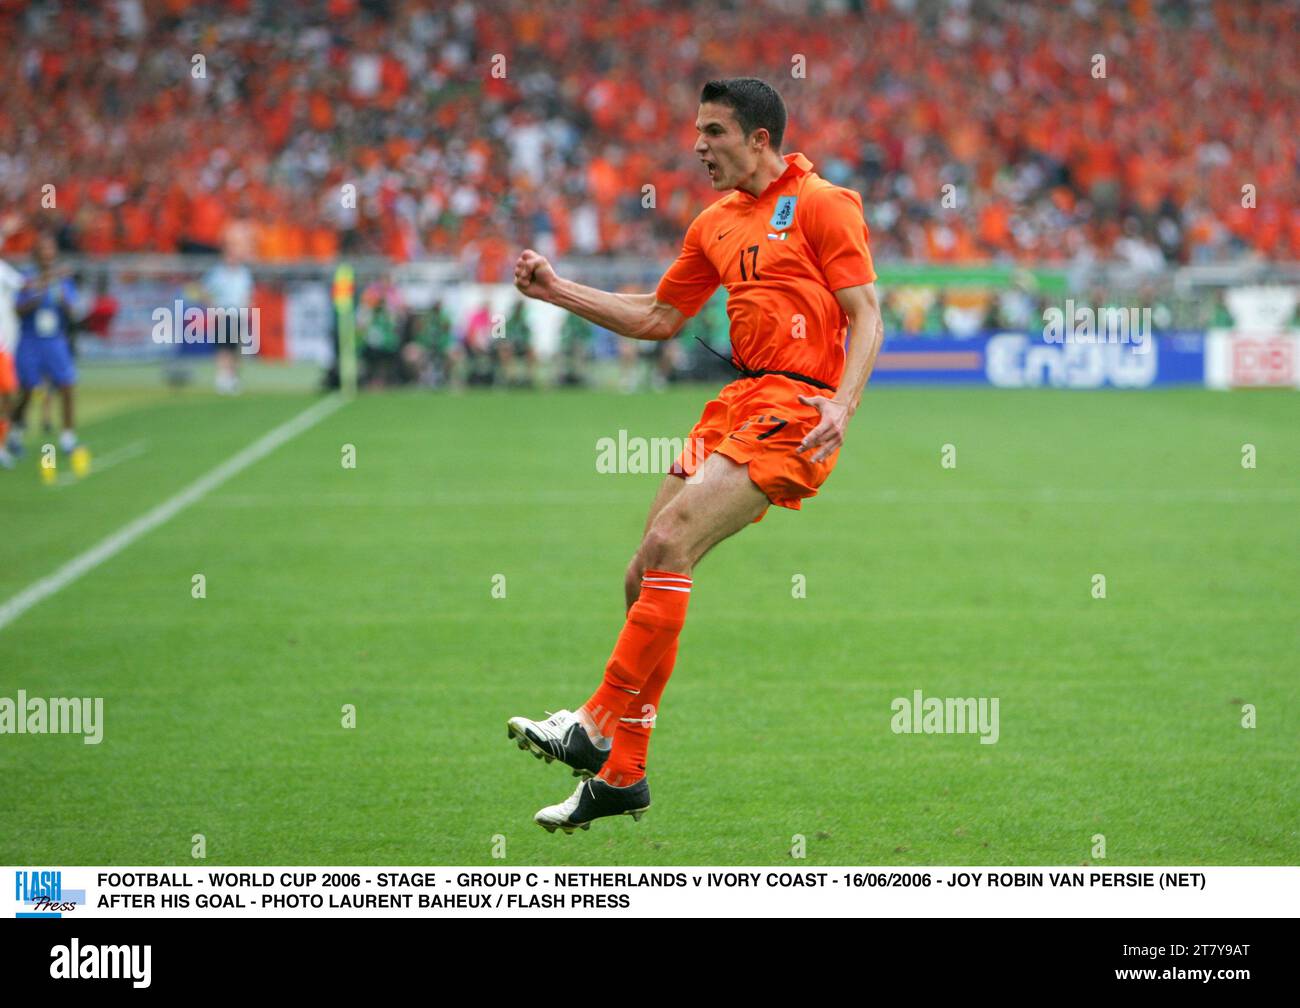 FOOTBALL - WORLD CUP 2006 - STAGE - GROUP C - NETHERLANDS v IVORY COAST - 16/06/2006 - JOY ROBIN VAN PERSIE (NET) AFTER HIS GOAL - PHOTO LAURENT BAHEUX / FLASH PRESS Stock Photo